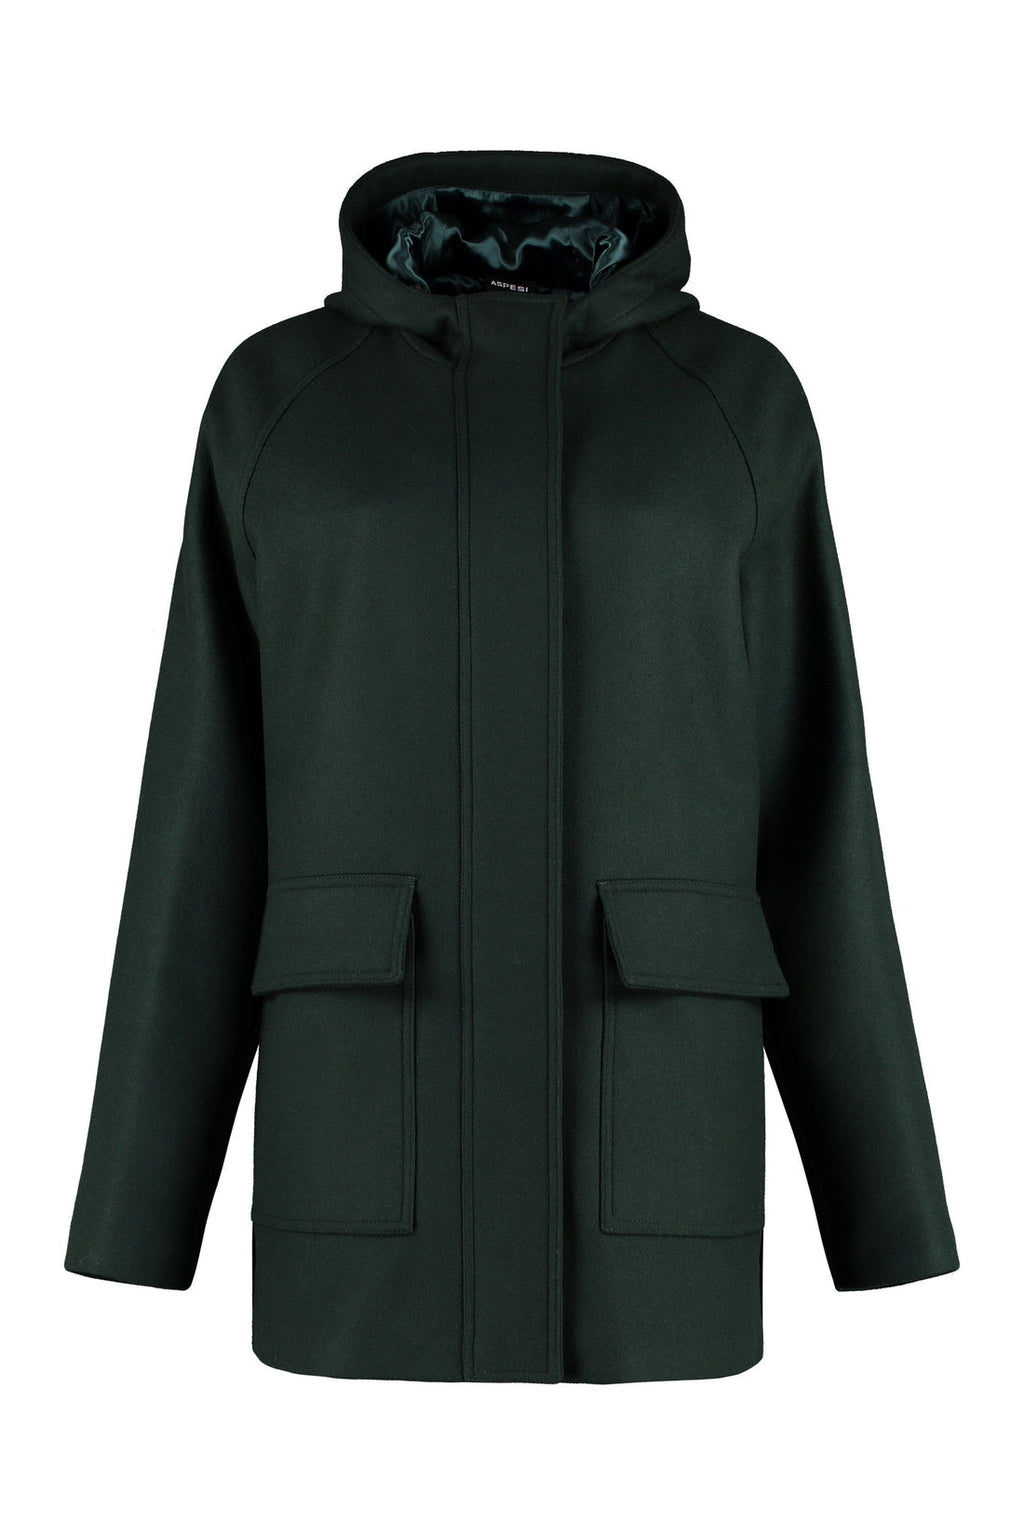 Aspesi-OUTLET-SALE-Hooded cloth coat-ARCHIVIST